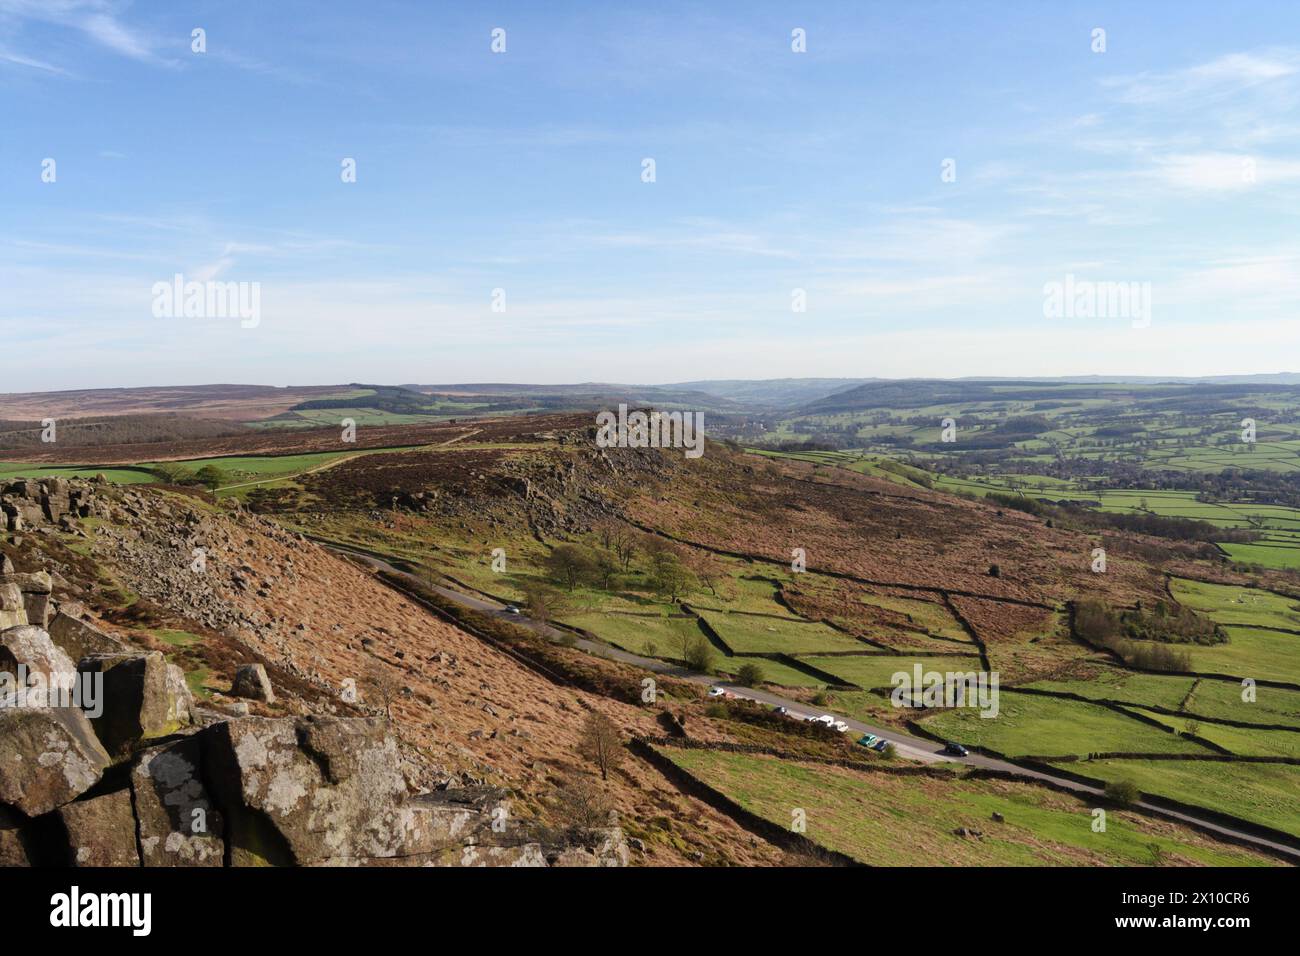 Curbar and Baslow Edge Peak District national park, Derbyshire England UK, Moorland English Landscape Rural British countryside scenic view Stock Photo